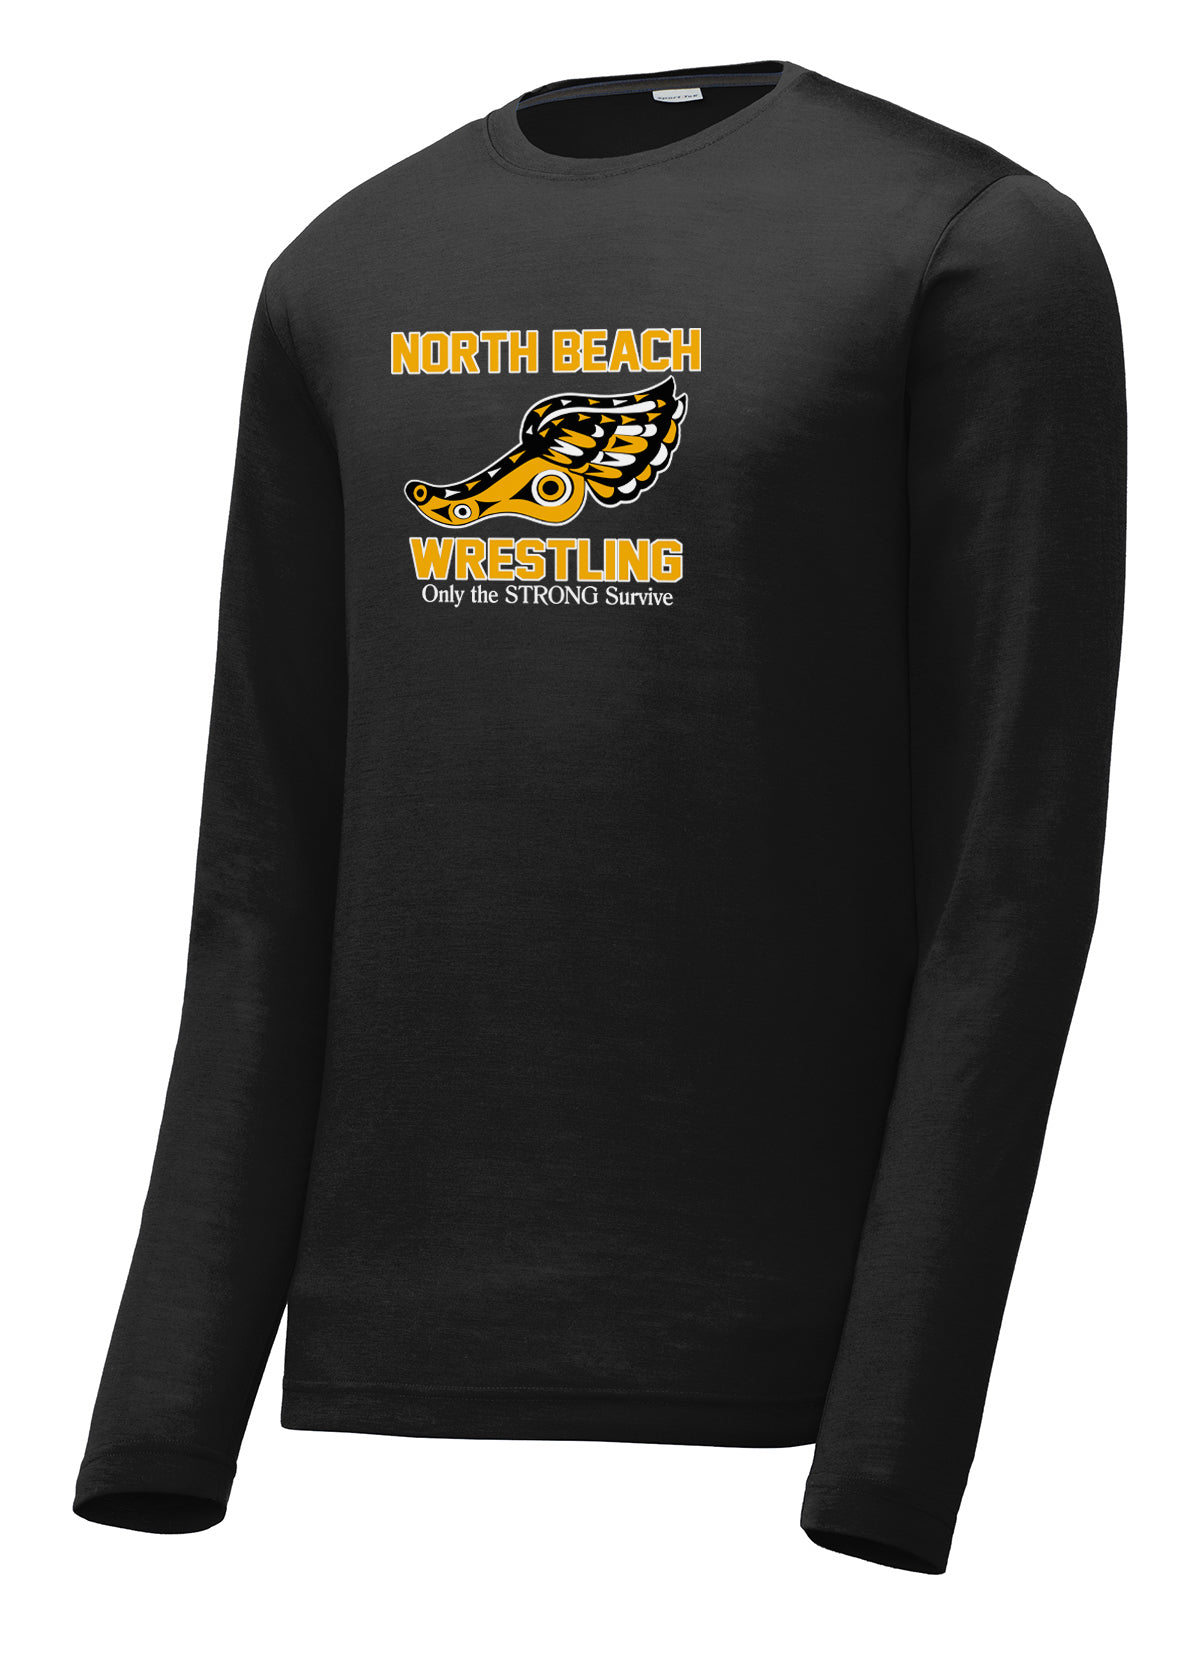 North Beach Wrestling Long Sleeve CottonTouch Performance Shirt: Quote Logo